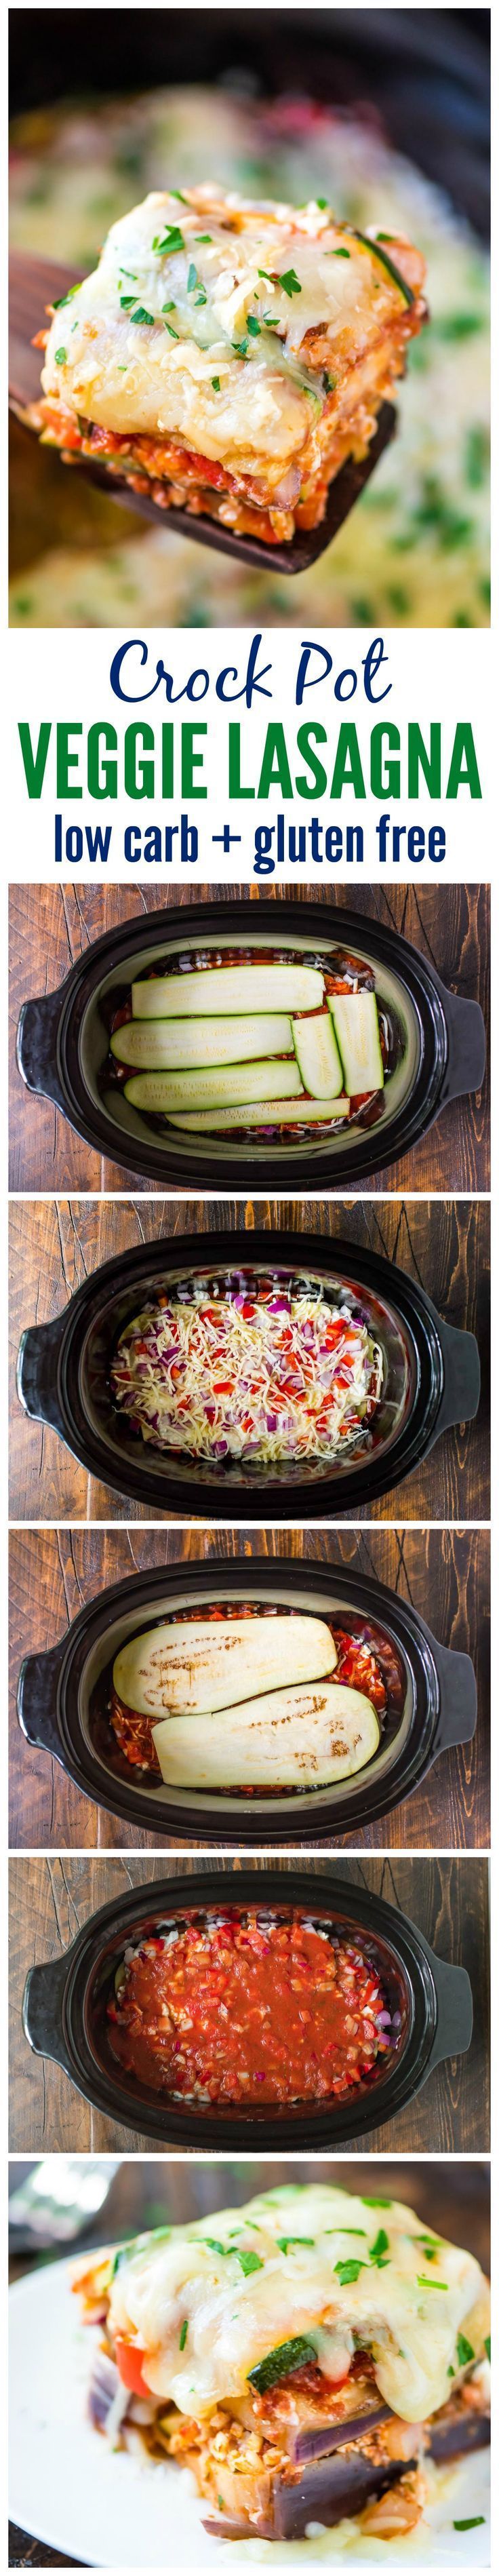 Delicious Crock Pot Low Carb Lasagna made with zucchini and eggplant instead of…